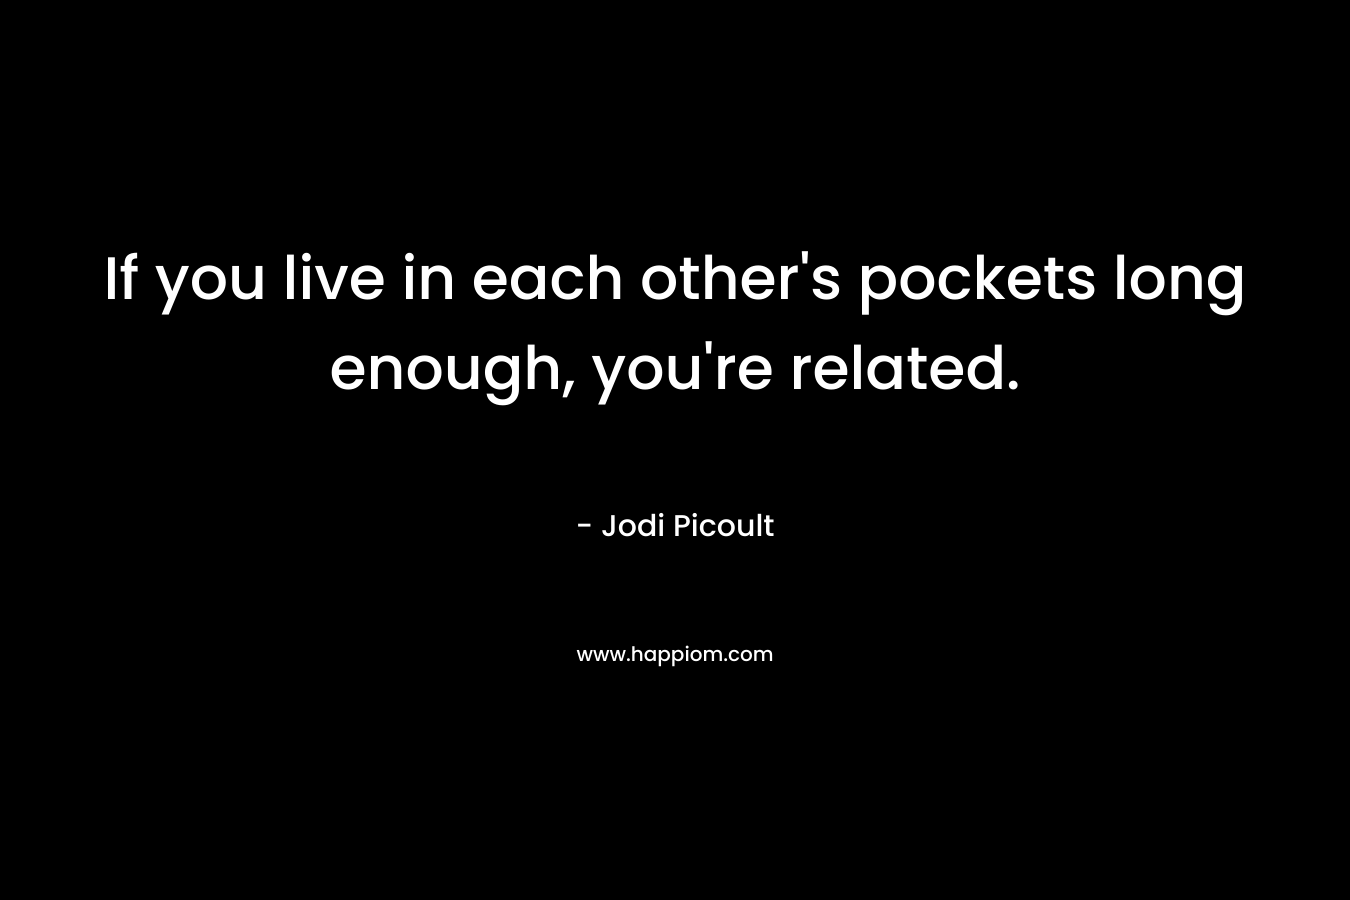 If you live in each other's pockets long enough, you're related.